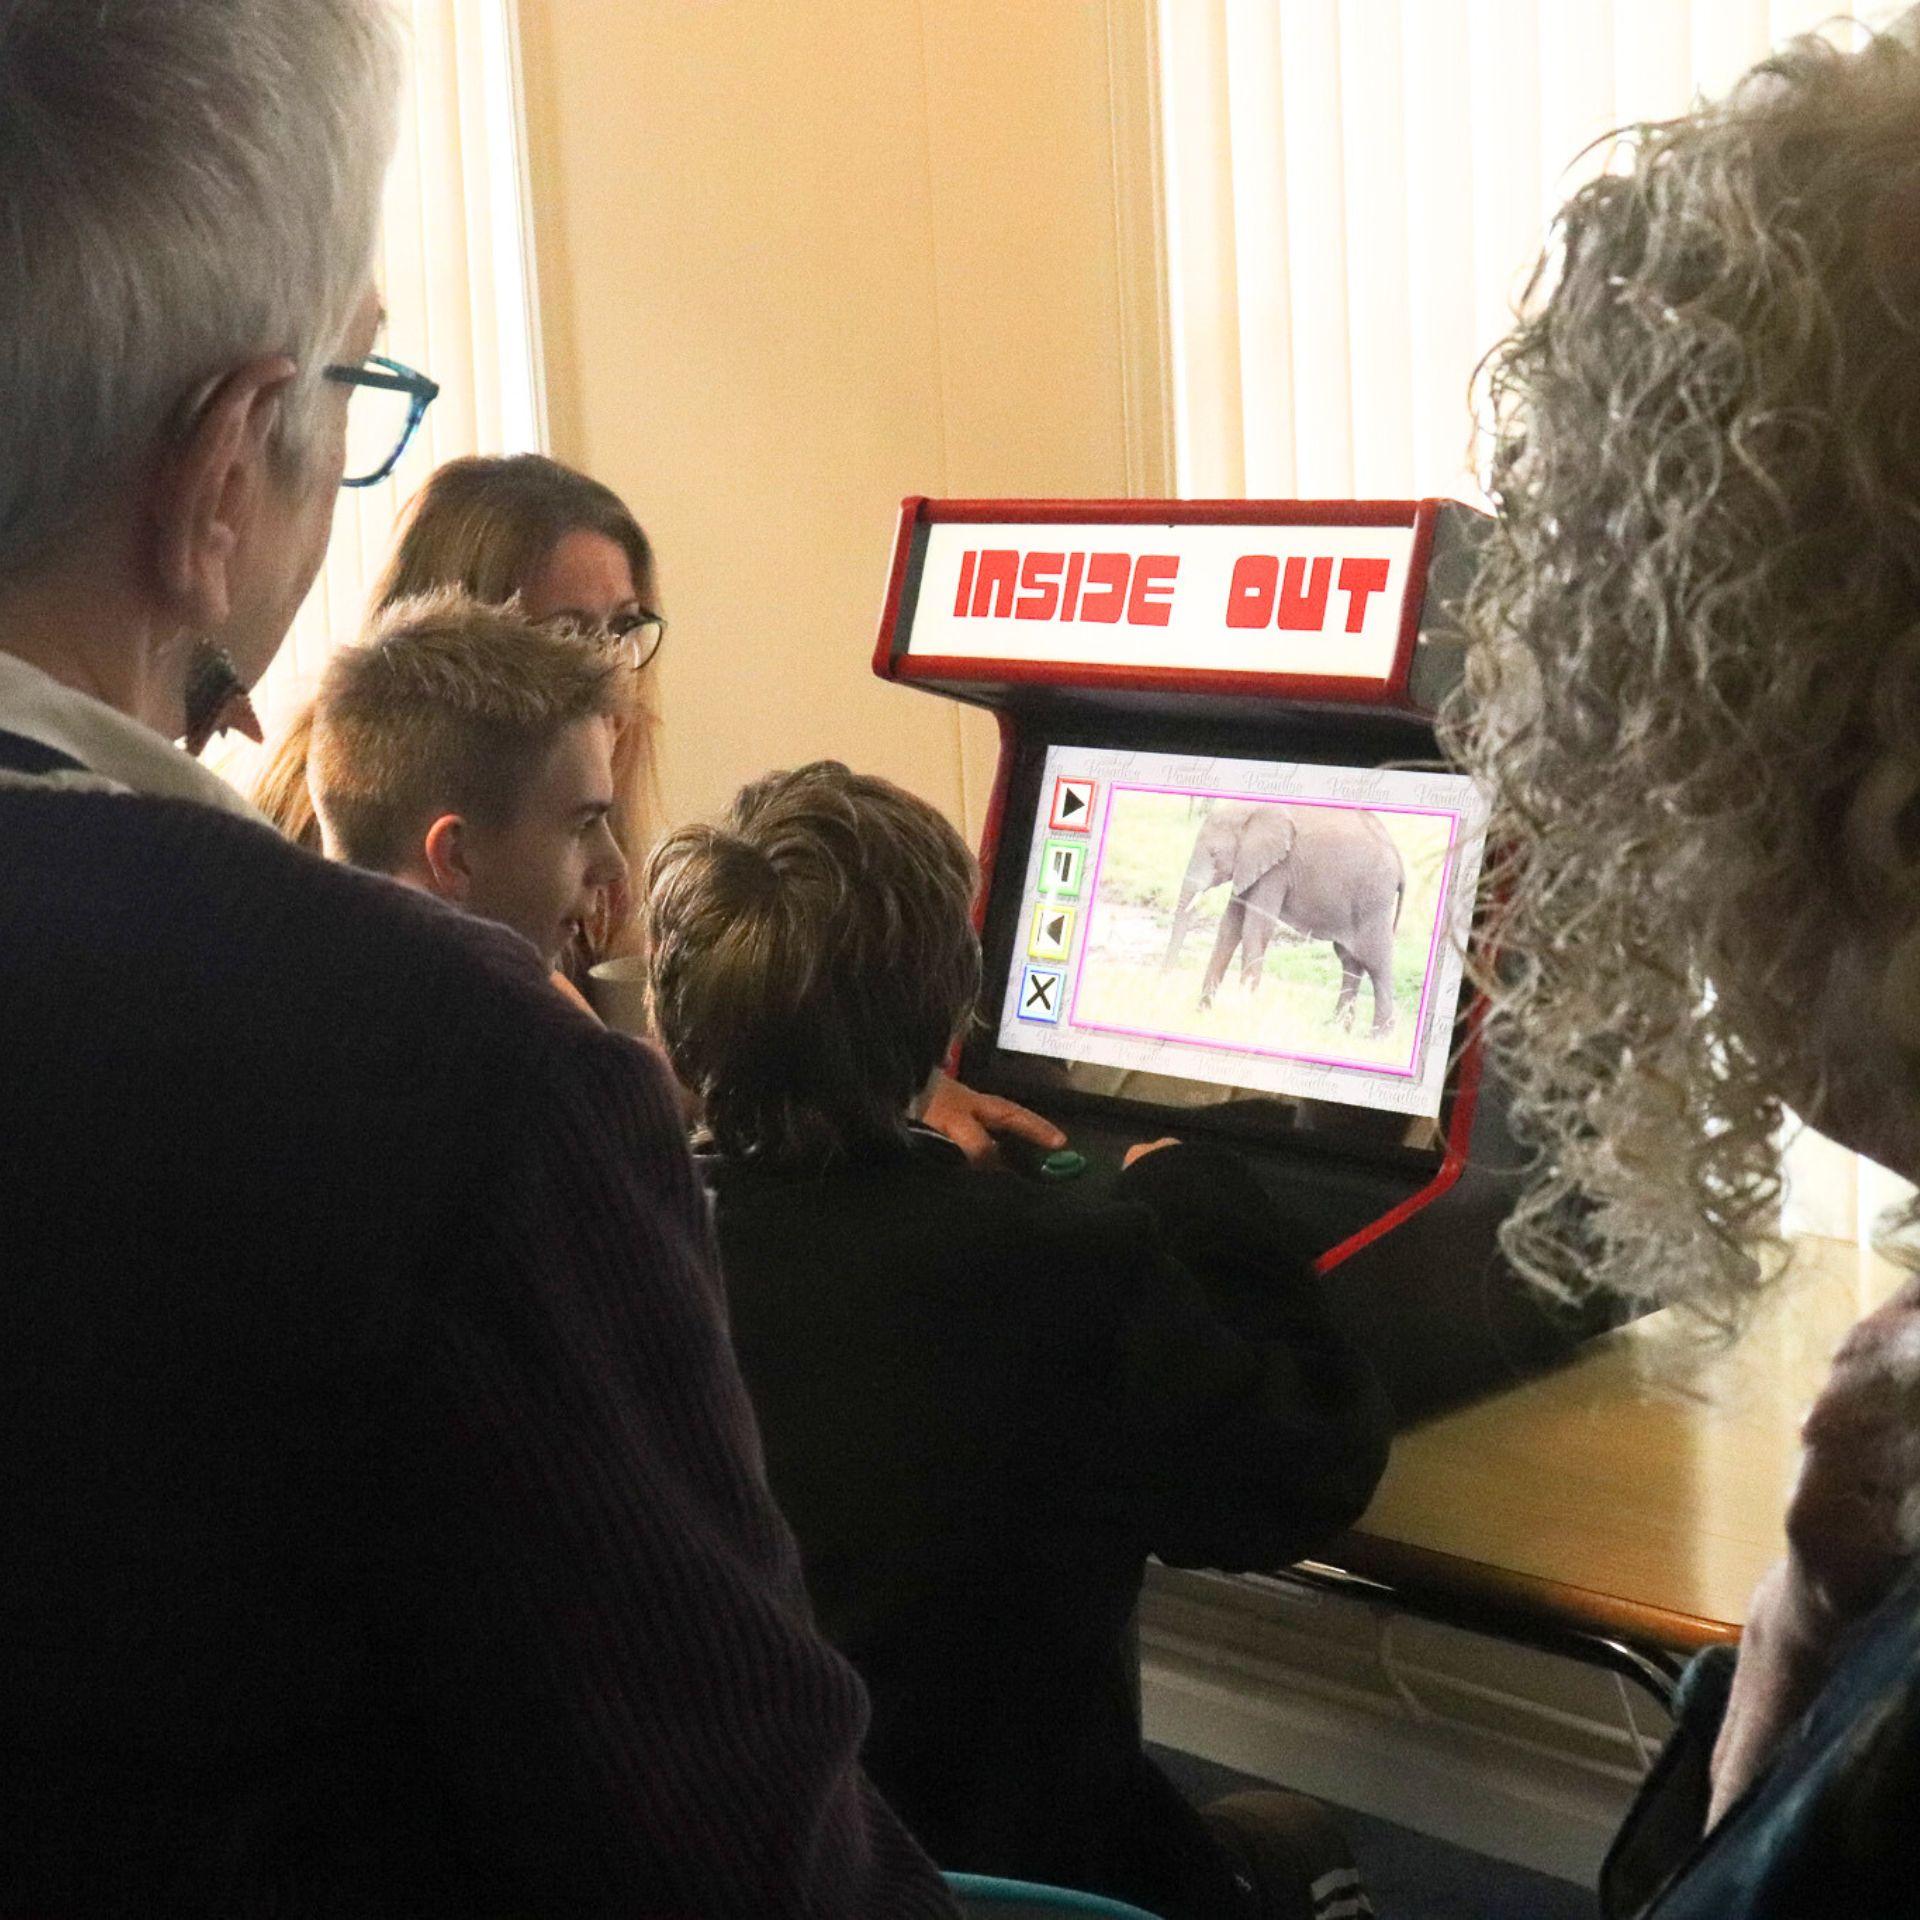 Hilary Hall and Councillor Jenny Bartlett Watching the Noah's ark retro game in progress